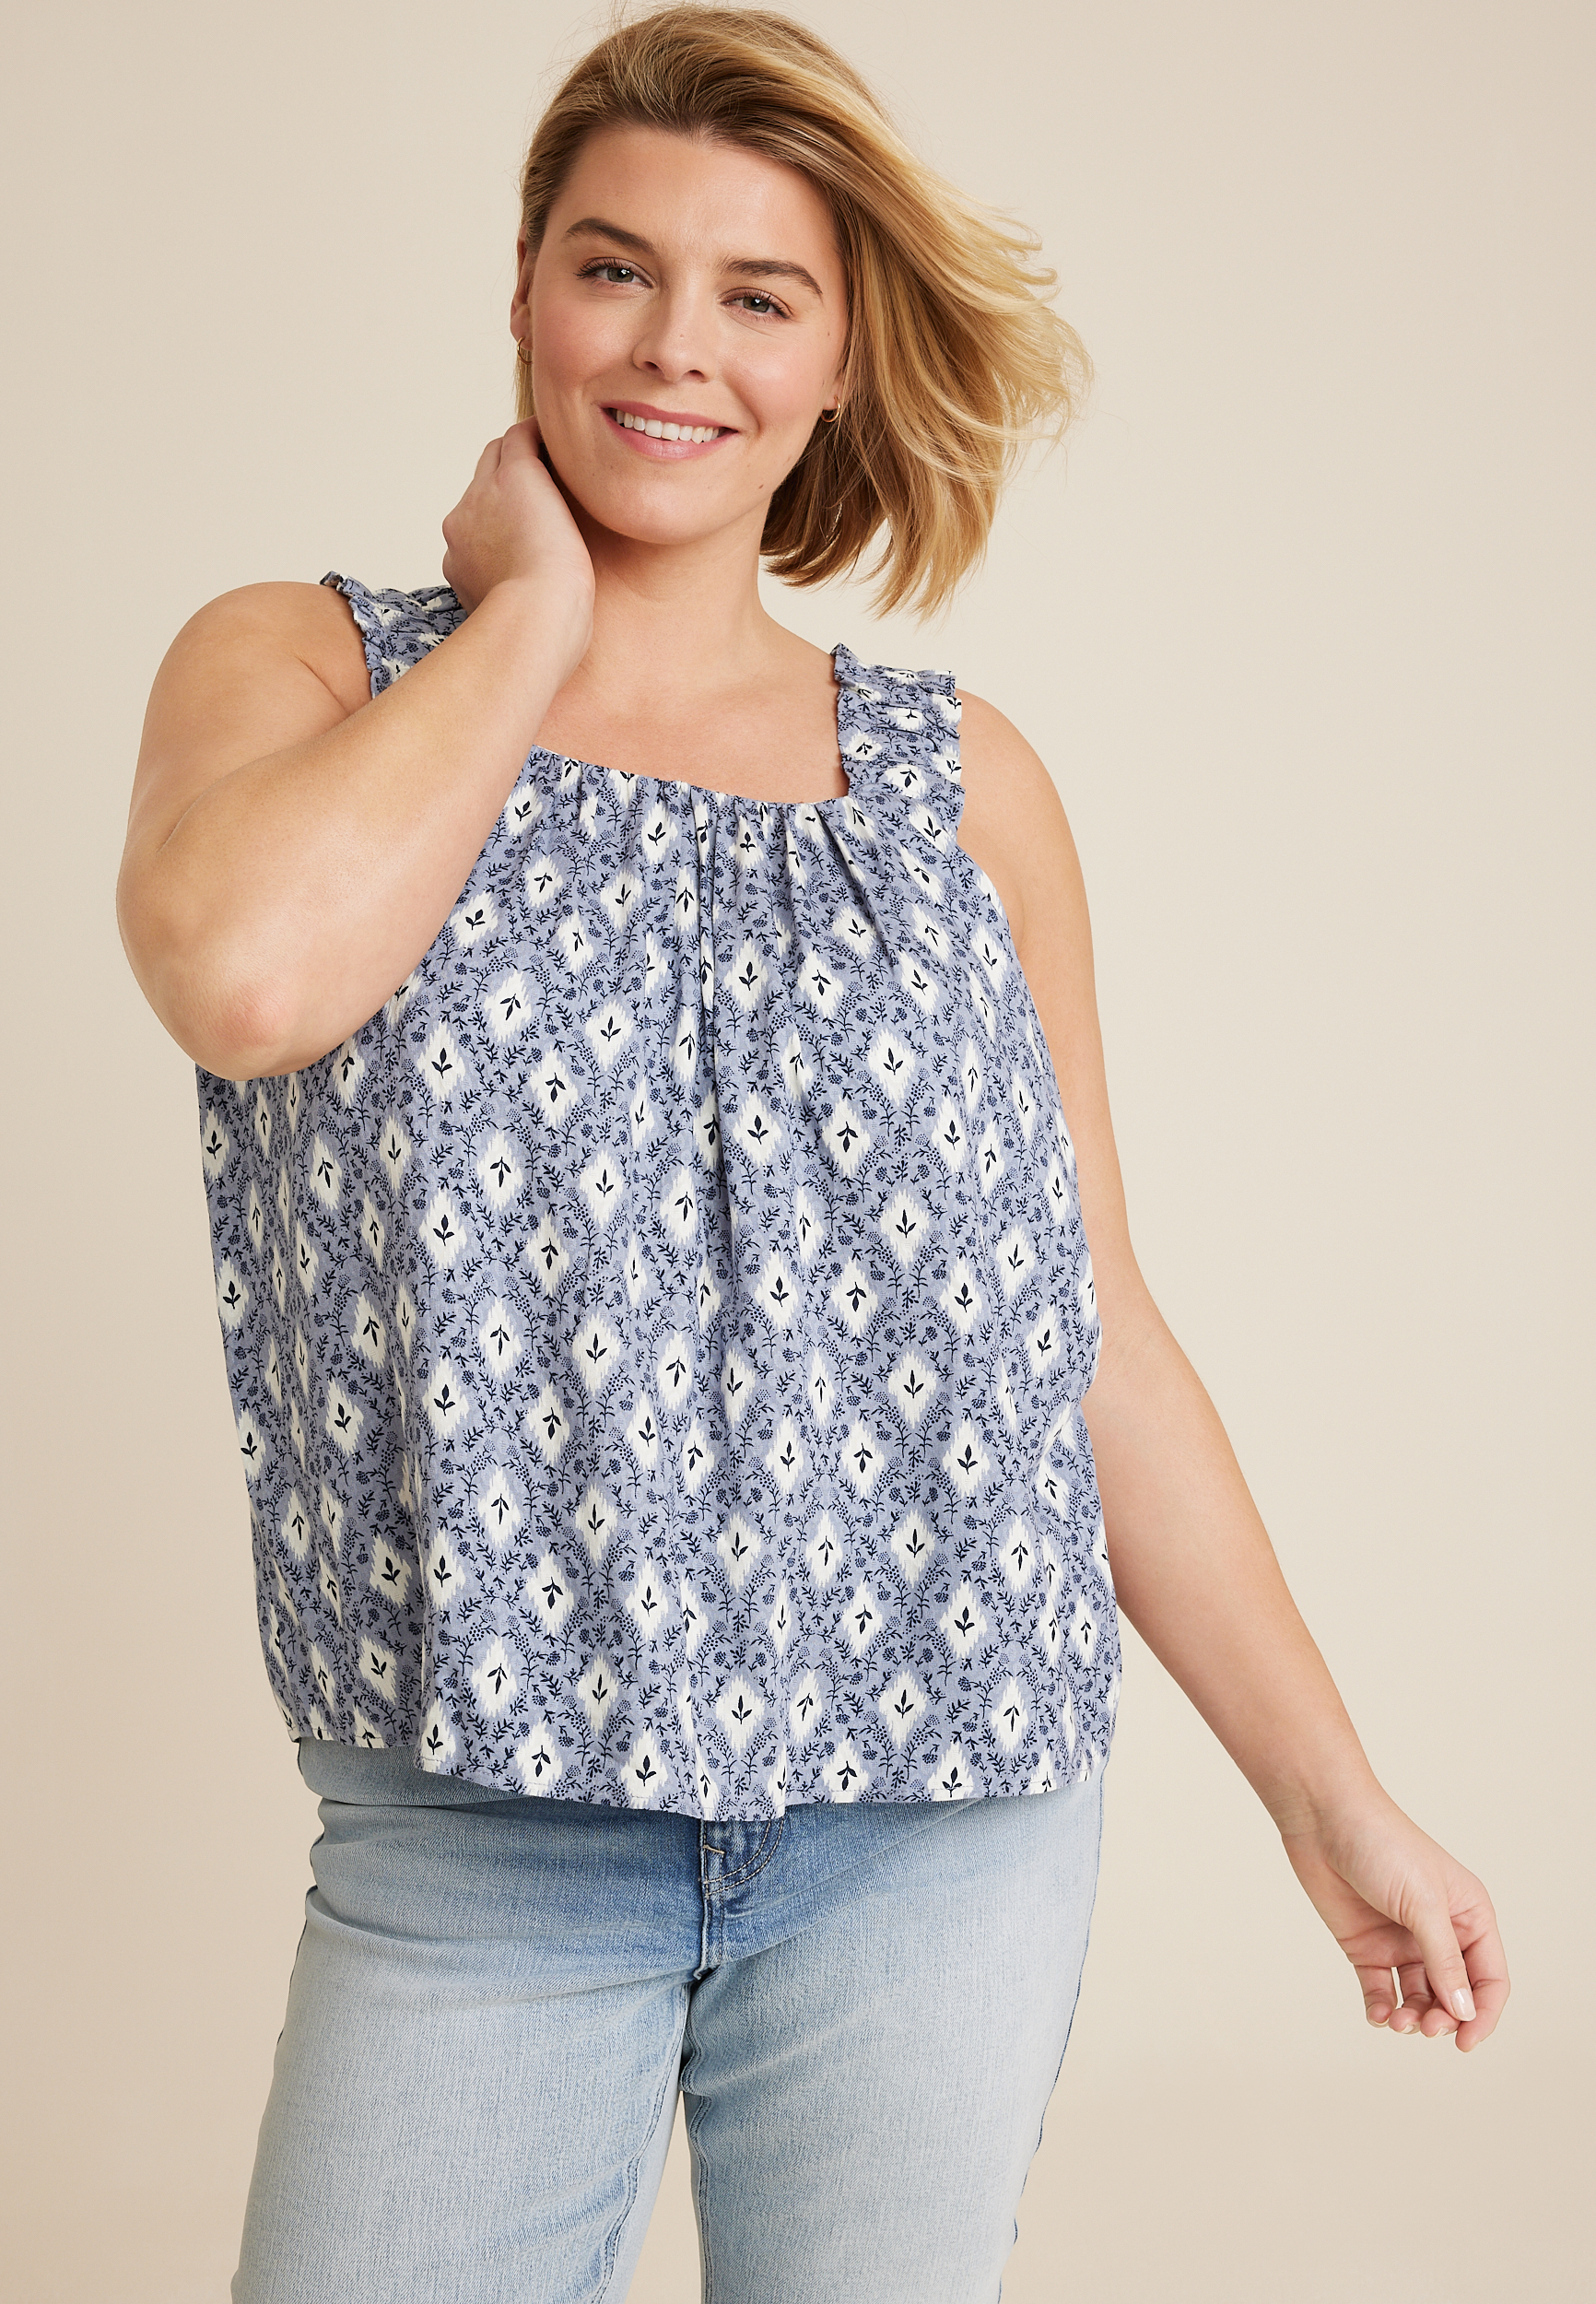 Women's Plus Size Tops: Plus Tanks, Tees, Sweaters & More